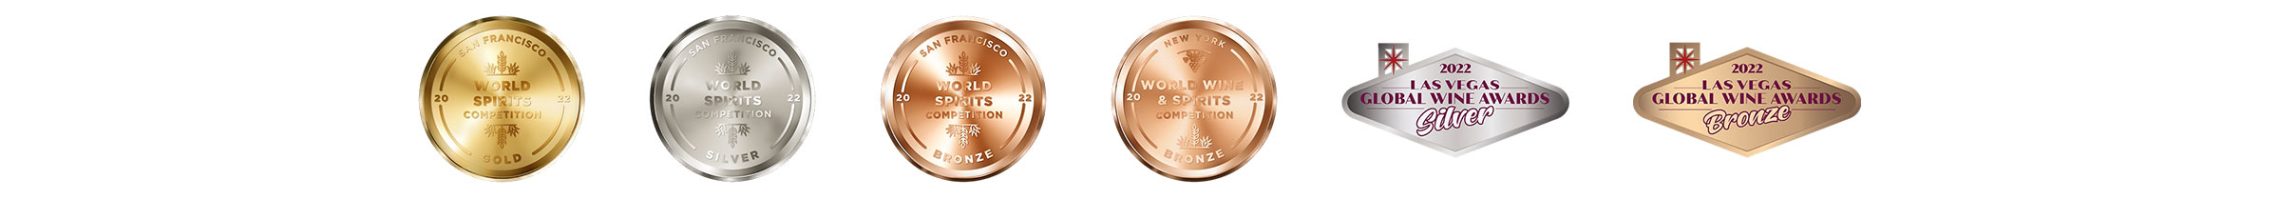 gold, silver, and bronze awards from 2022 San Francisco World Spirits Competition, bronze from New York World Wine & Spirits Competition, and silver and bronze from Las Vegas Global Wine Awards